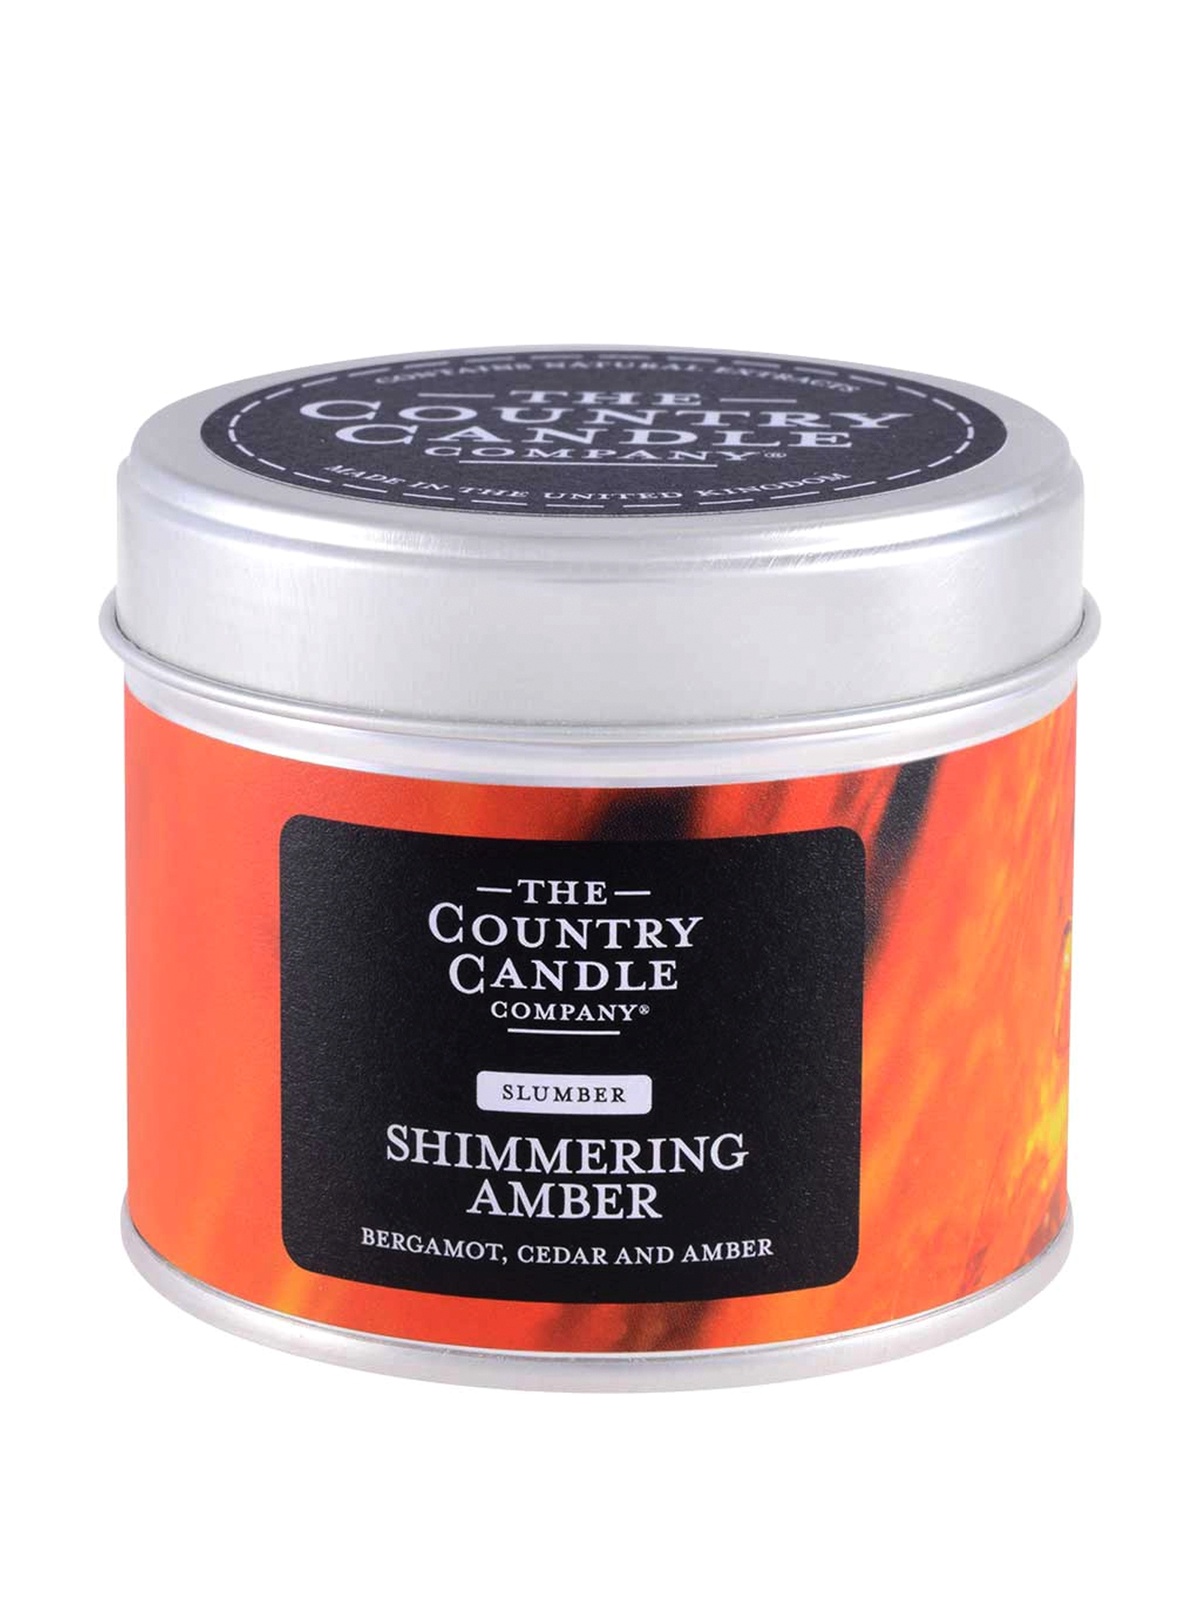 THE COUNTRY CANDLES